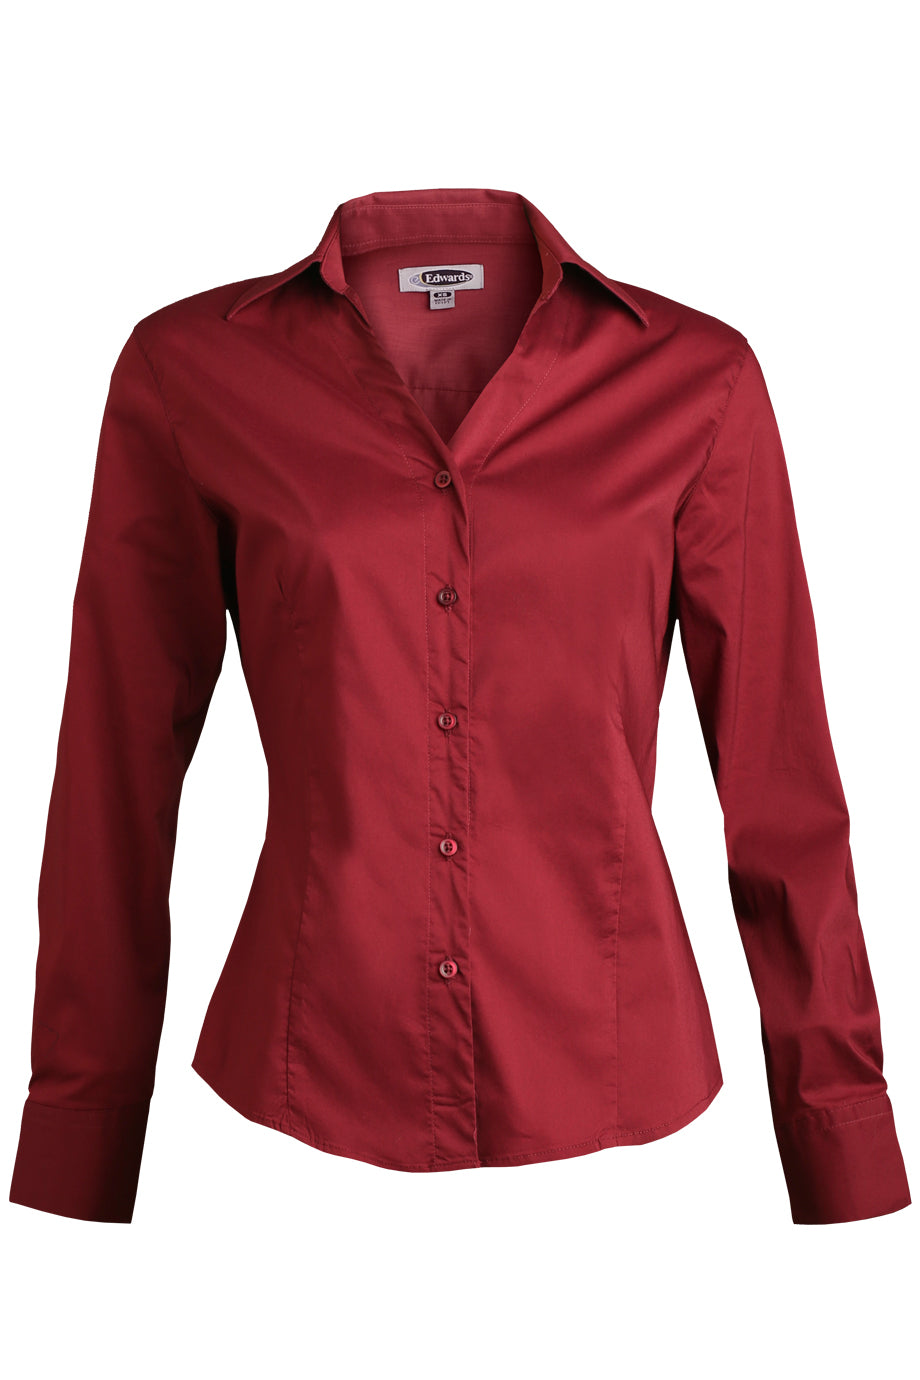 LADIES' TAILORED V-NECK STRETCH BLOUSE